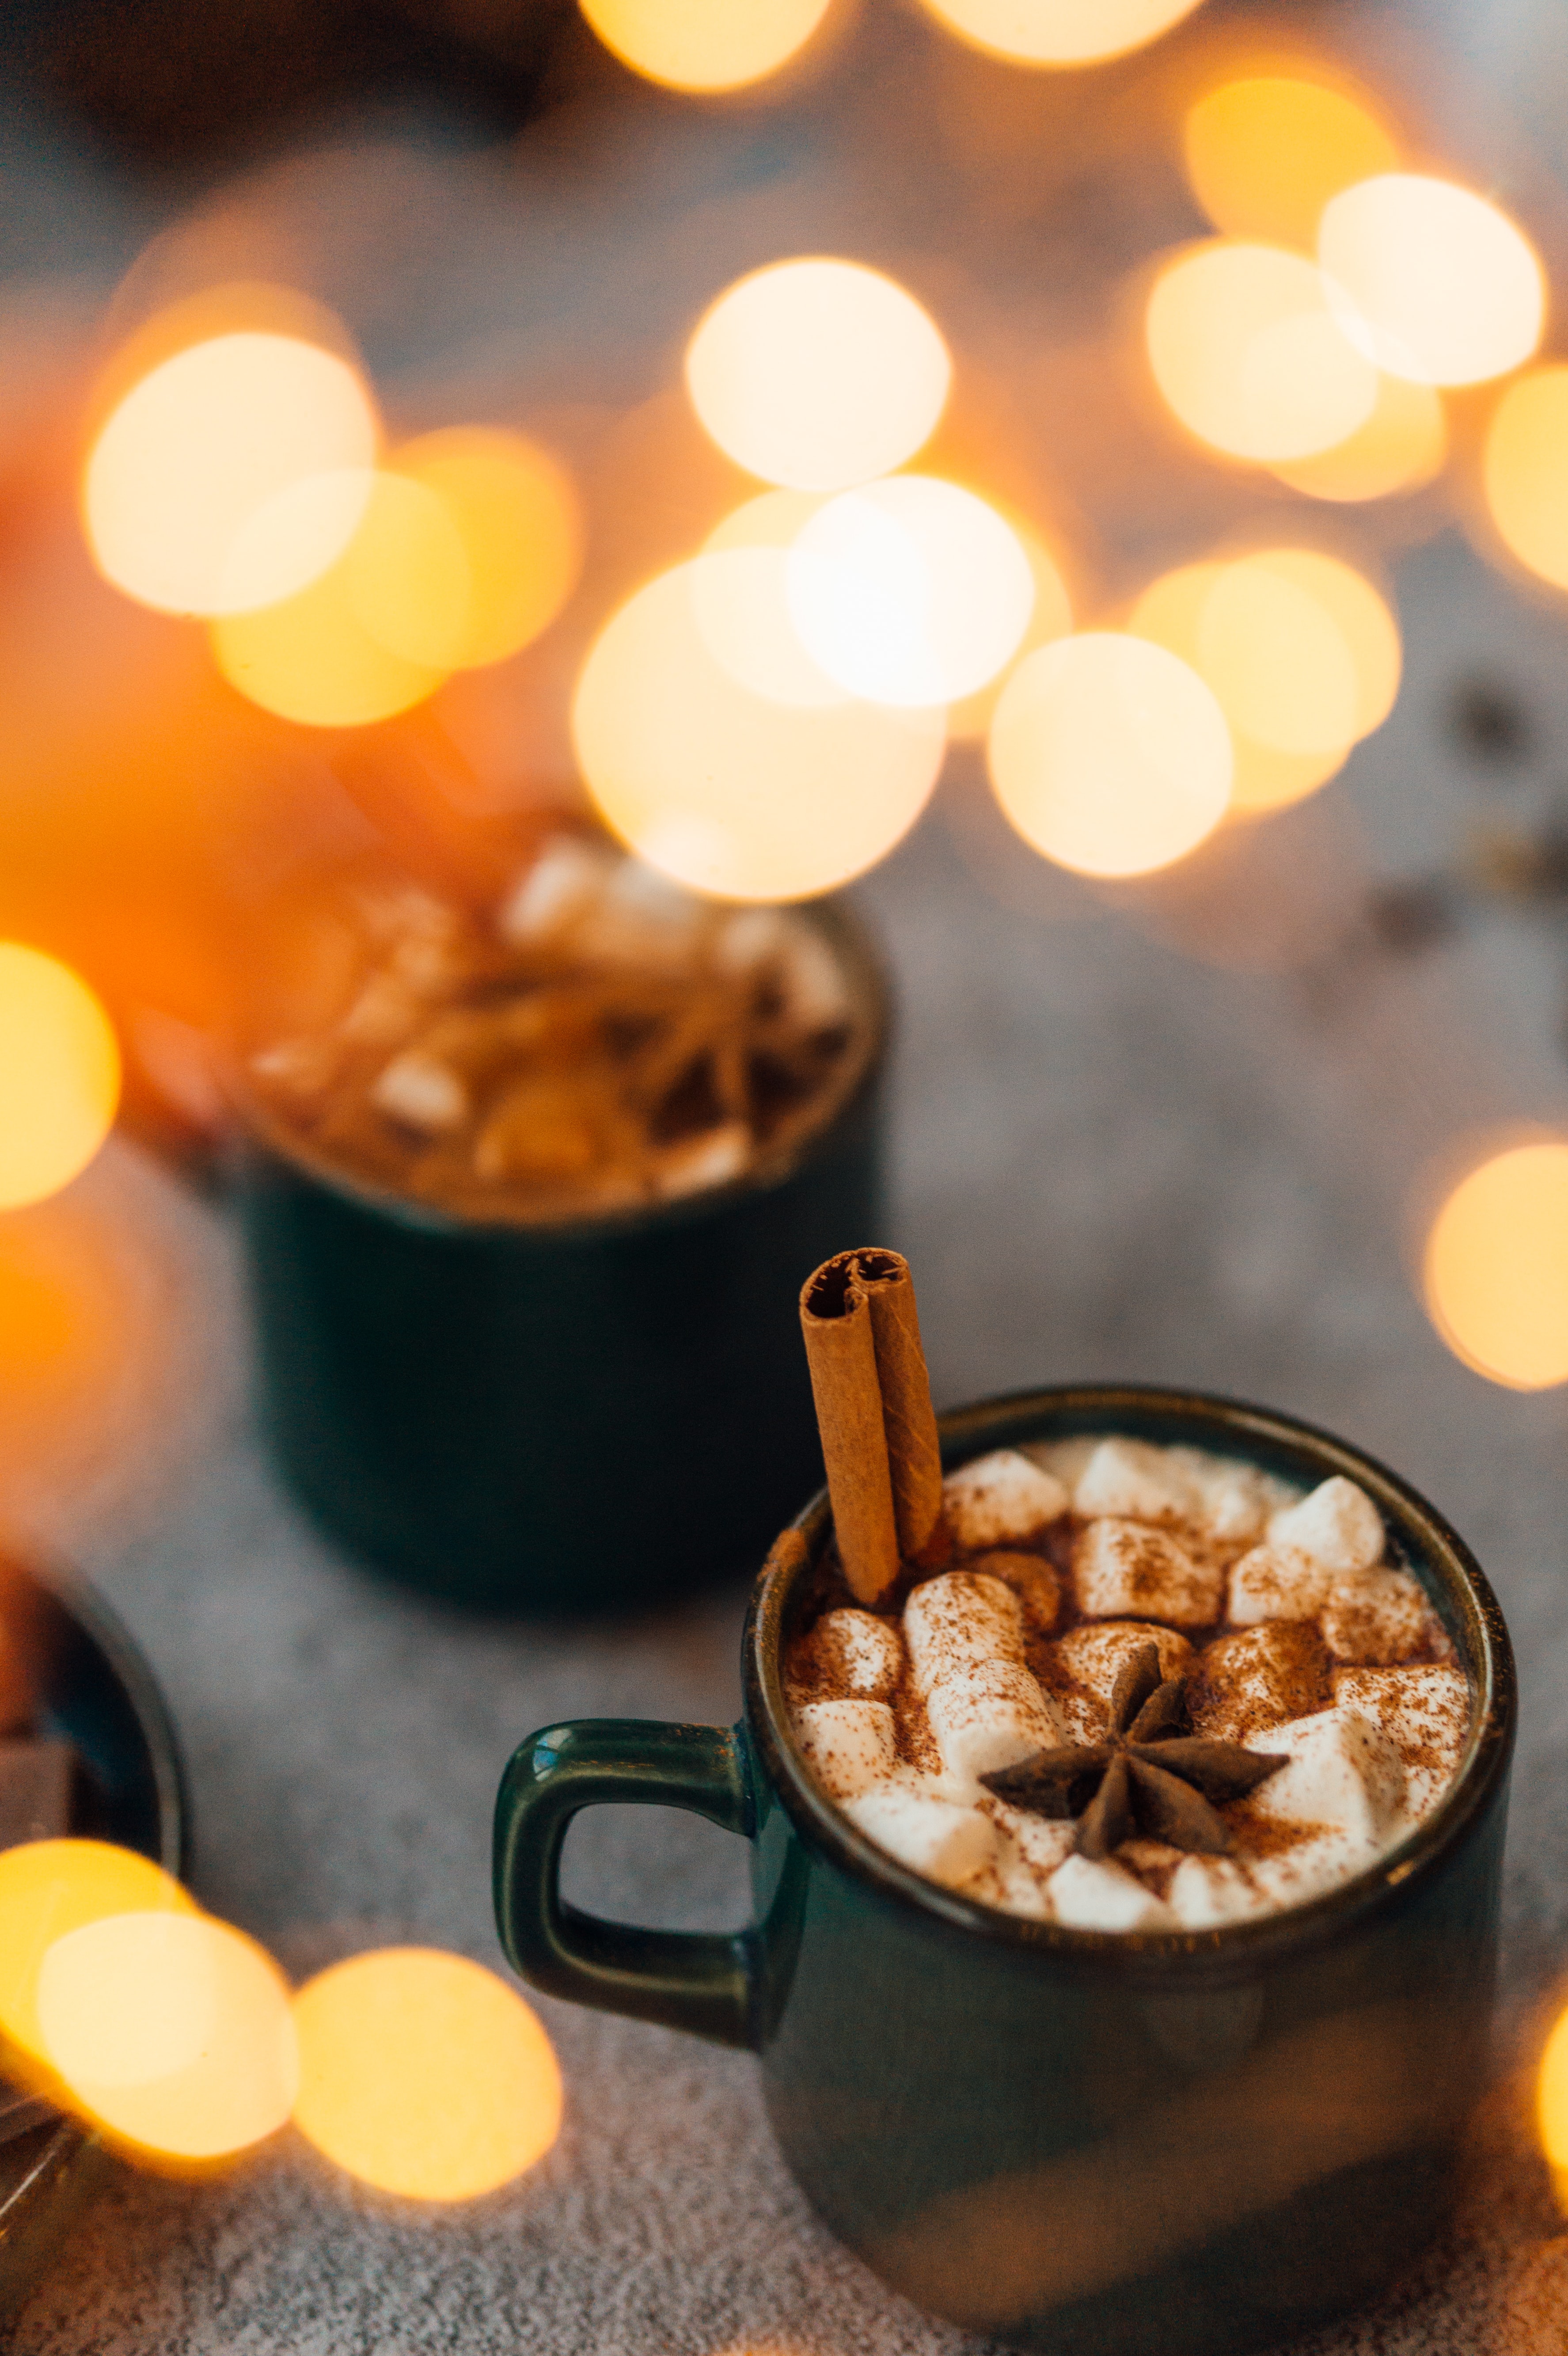 cup, mug, glare, food, cinnamon, bokeh, boquet, spice, spices, marshmallow, zephyr, anise cell phone wallpapers